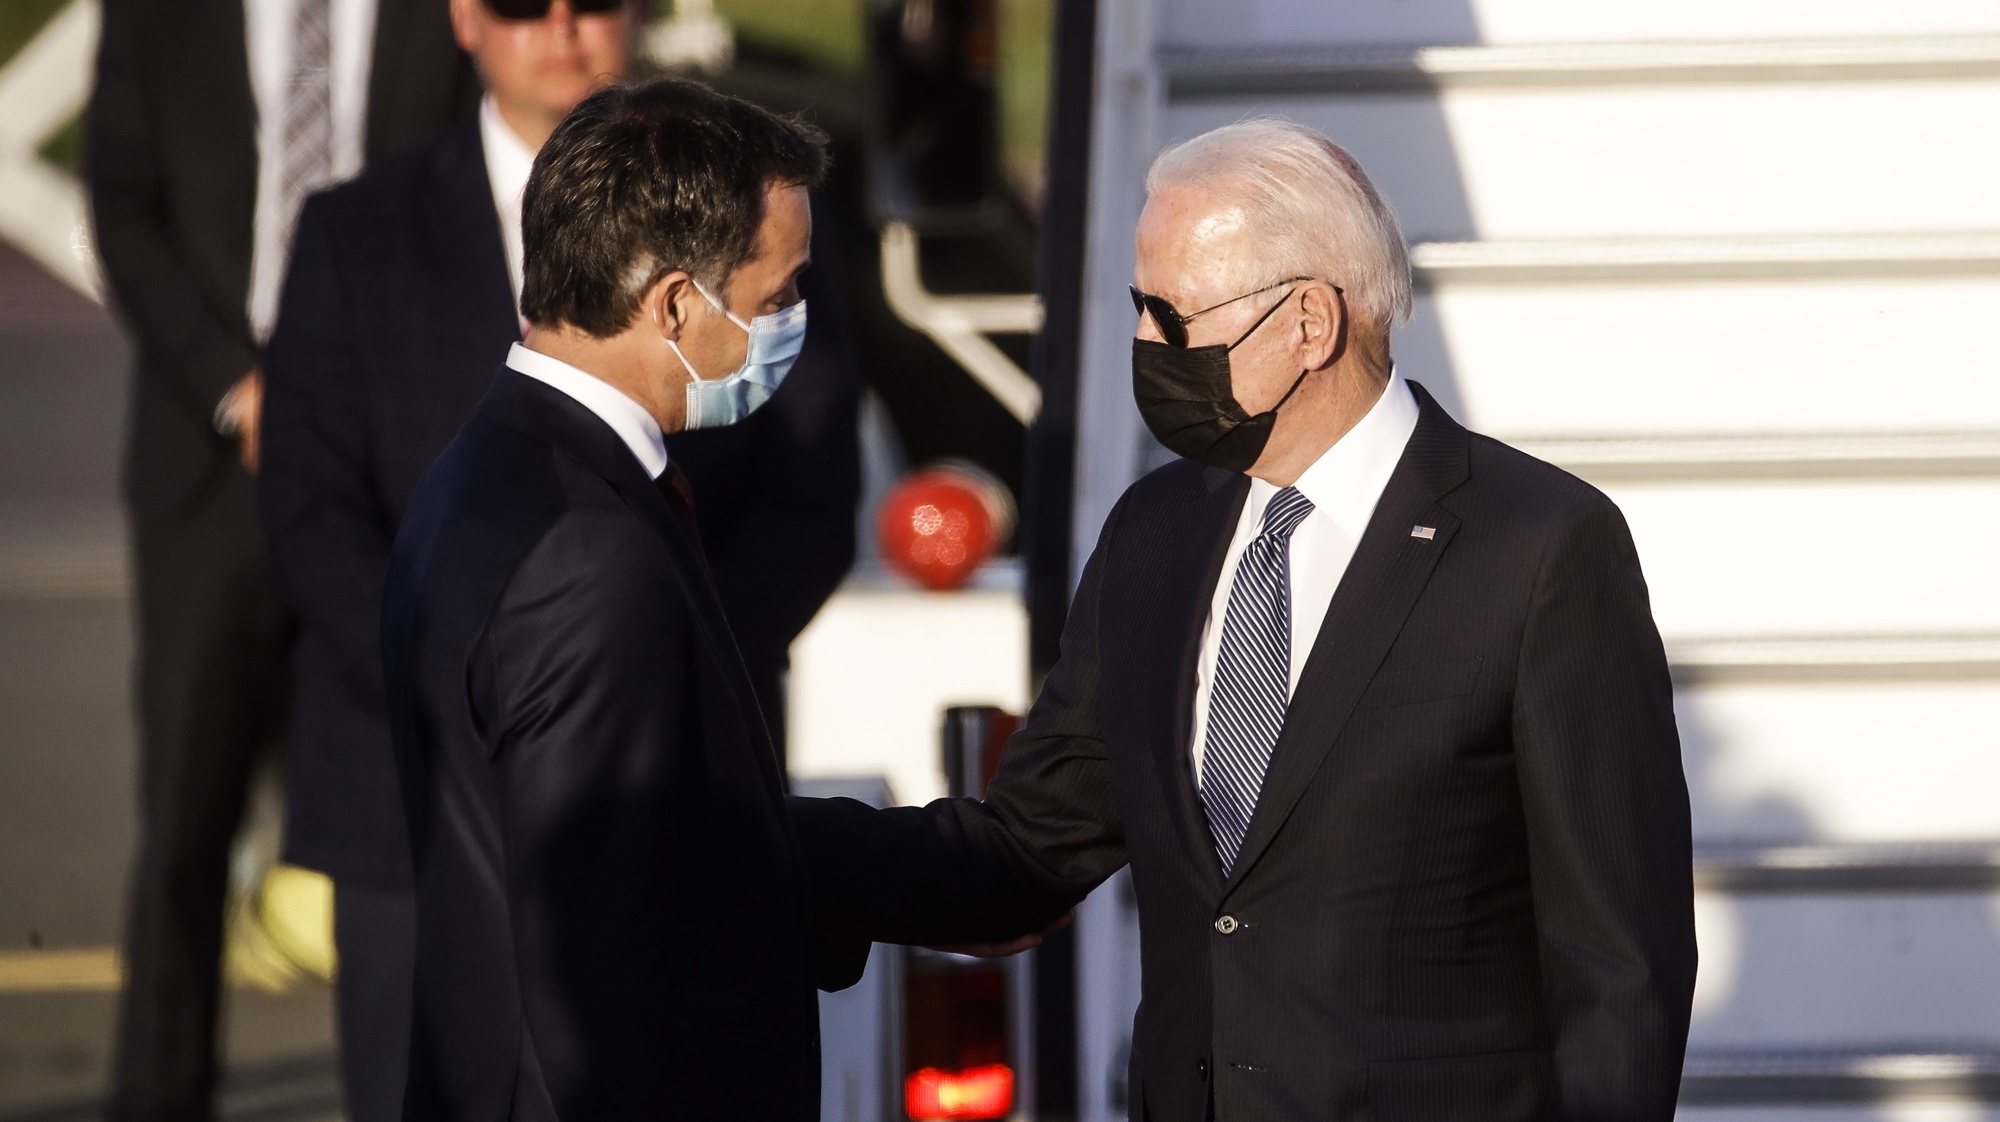 epa09268618 Belgium Prime Minister Alexander De Croo (L) welcomes US President Joe Biden (R) upon arrival at Brussels Military Airport, in Melsbroek, Belgium, 13 June 2021. US President Biden is in Brussels for two days of NATO Summit and EU-US summit on 14 and 15 June.  EPA/OLIVIER HOSLET / POOL